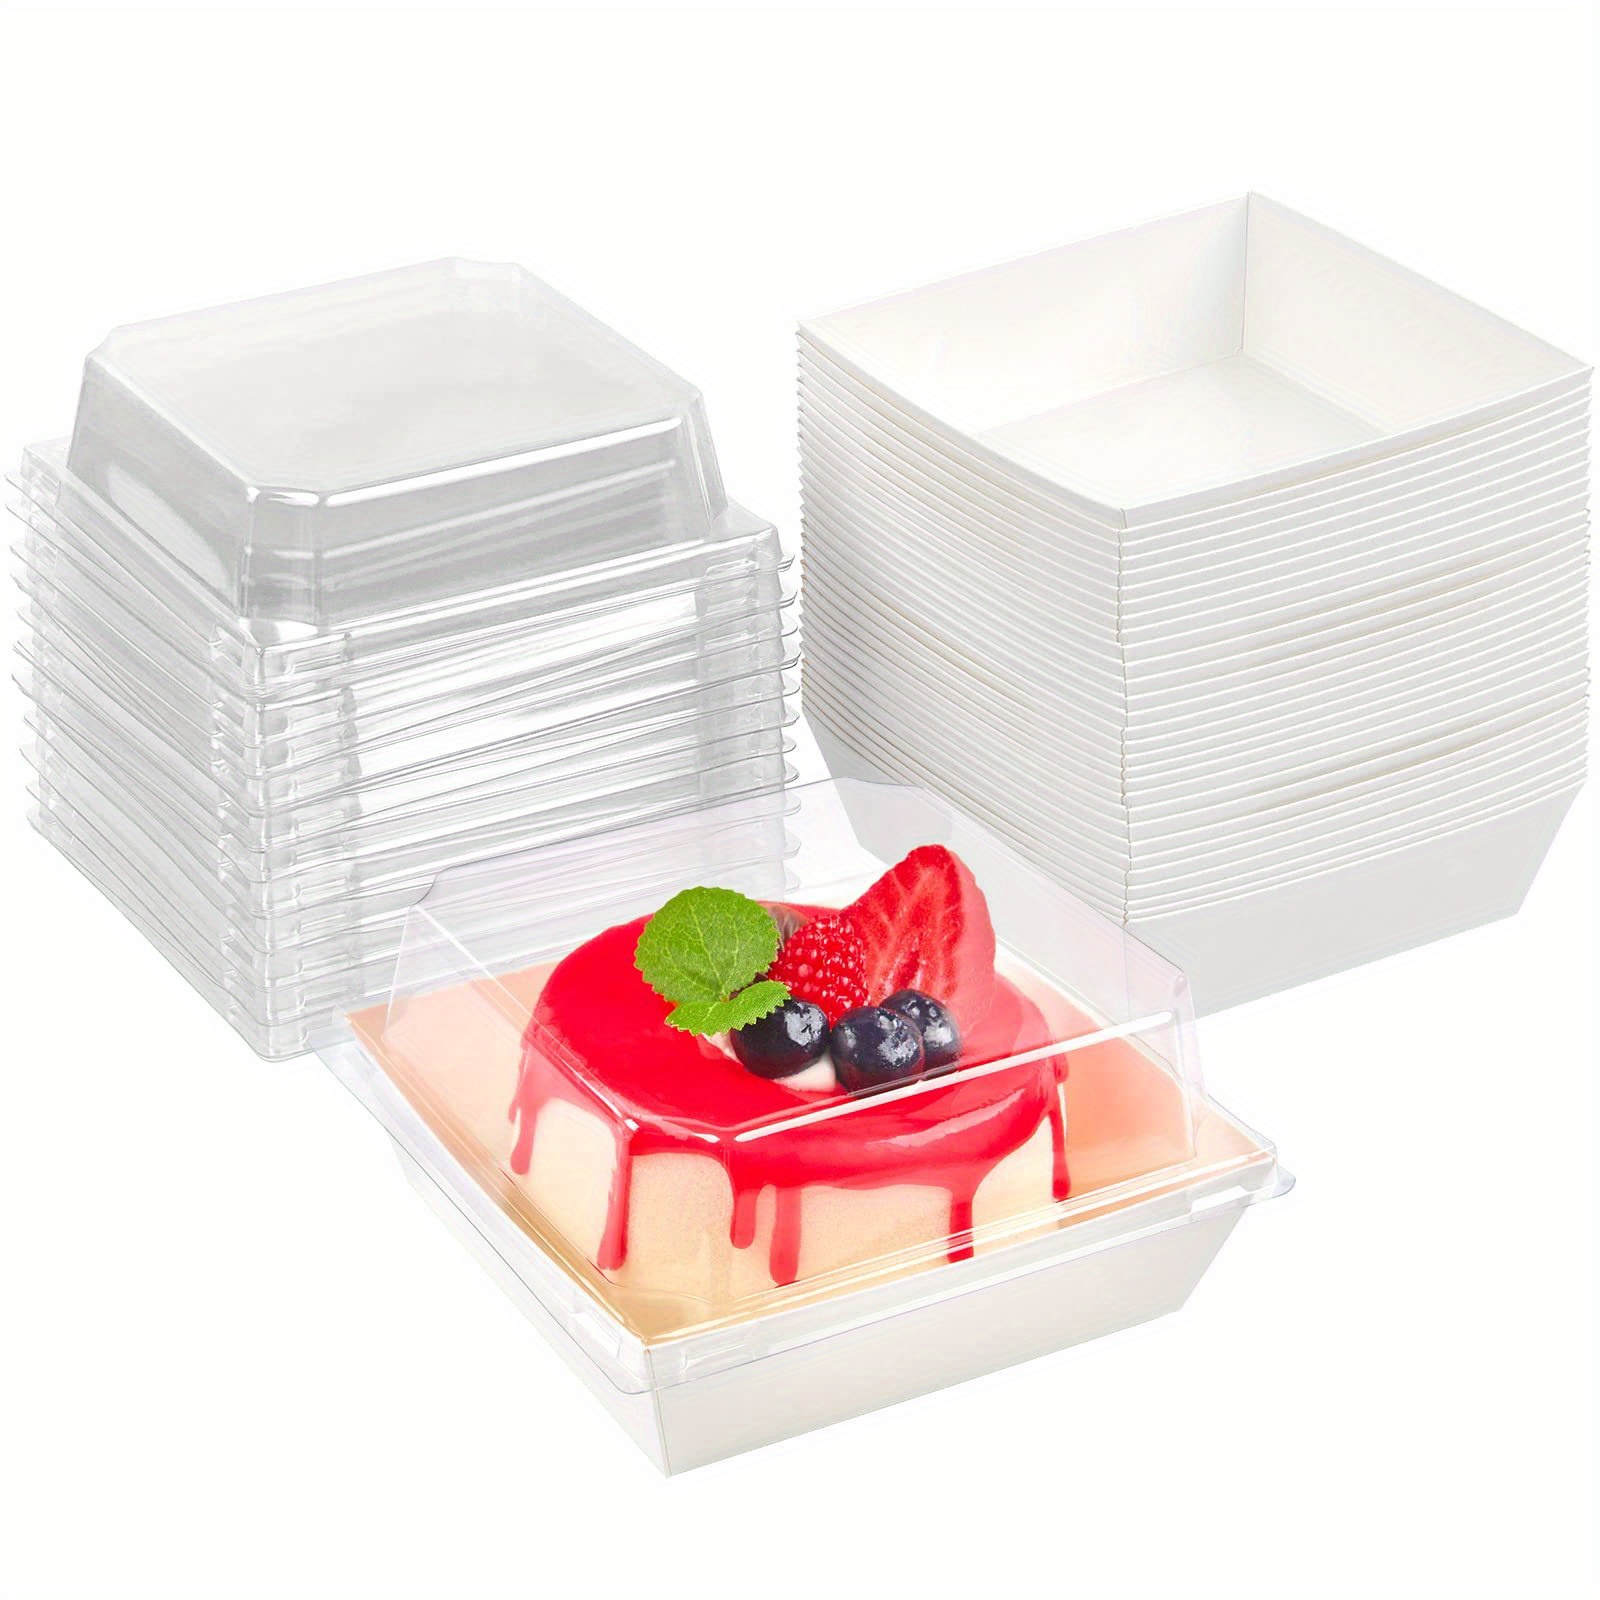 Paperboard and The Carton Caddy® v. Plastic Milk Containers - ERA